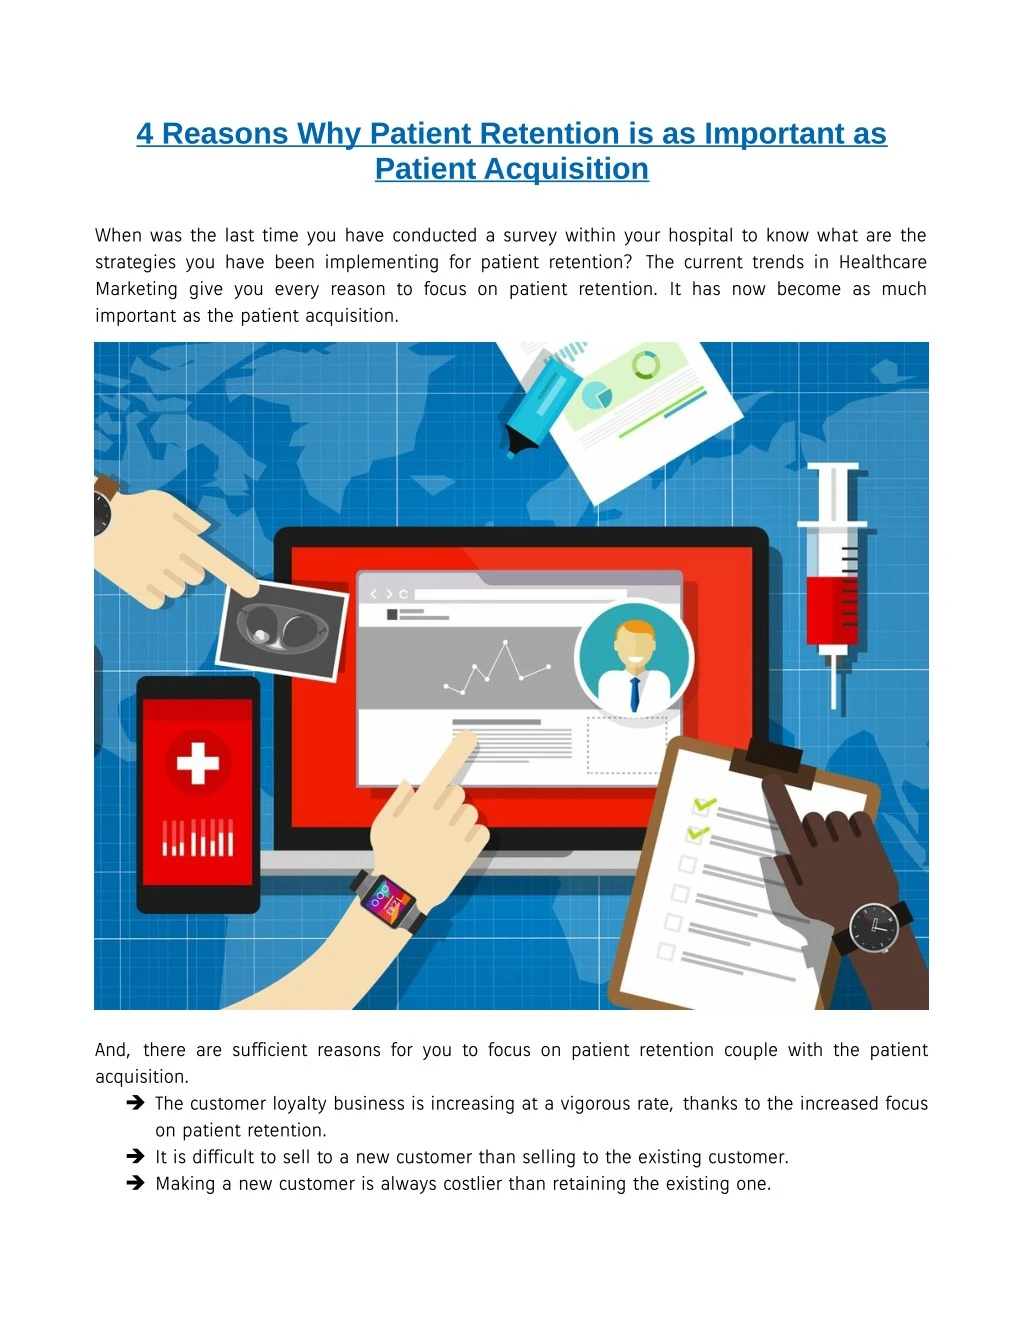 4 reasons why patient retention is as important